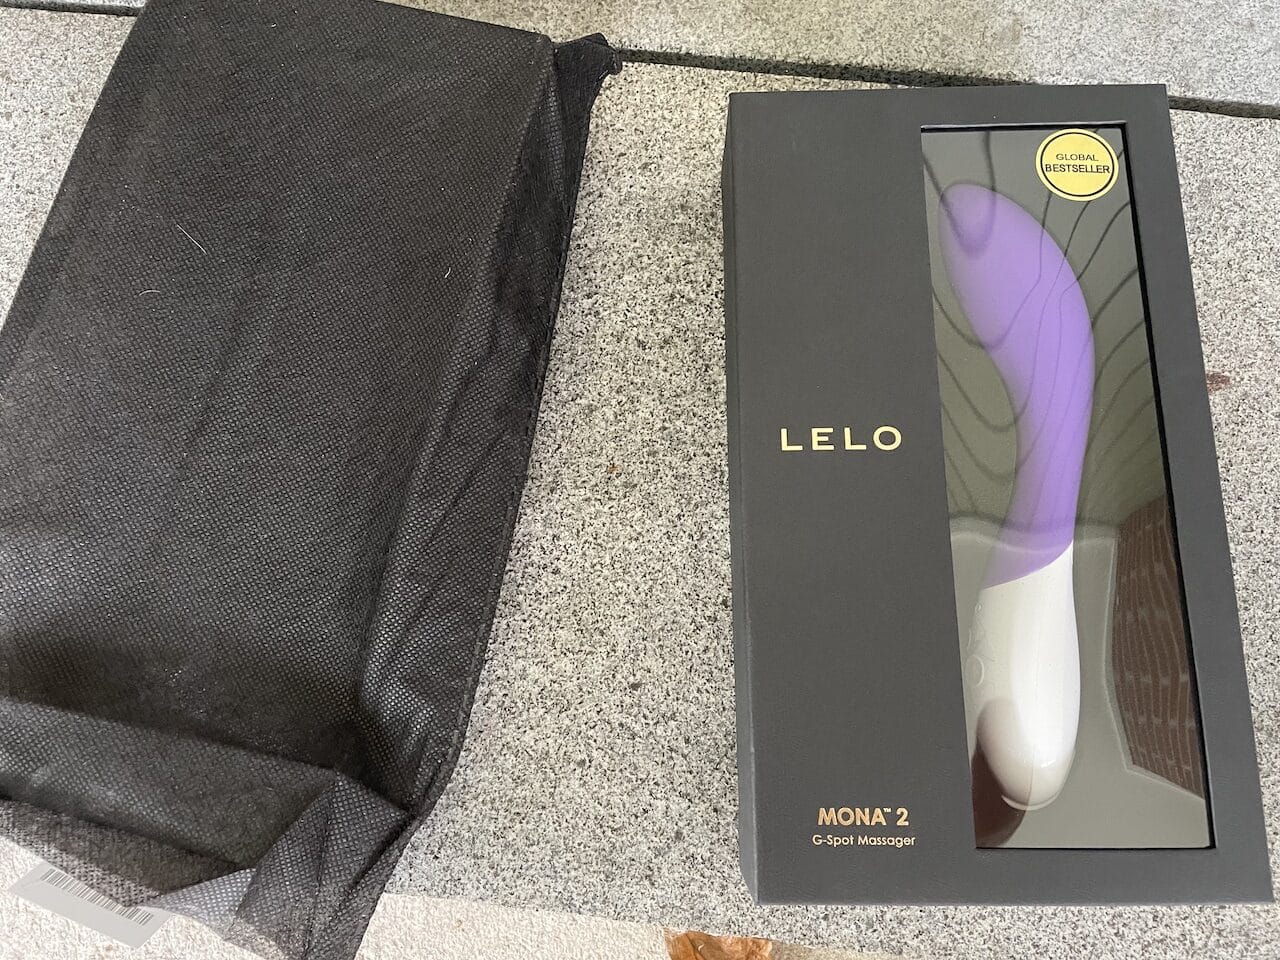 Lelo Mona 2 Unwrapping Excitement: A Packaging Review